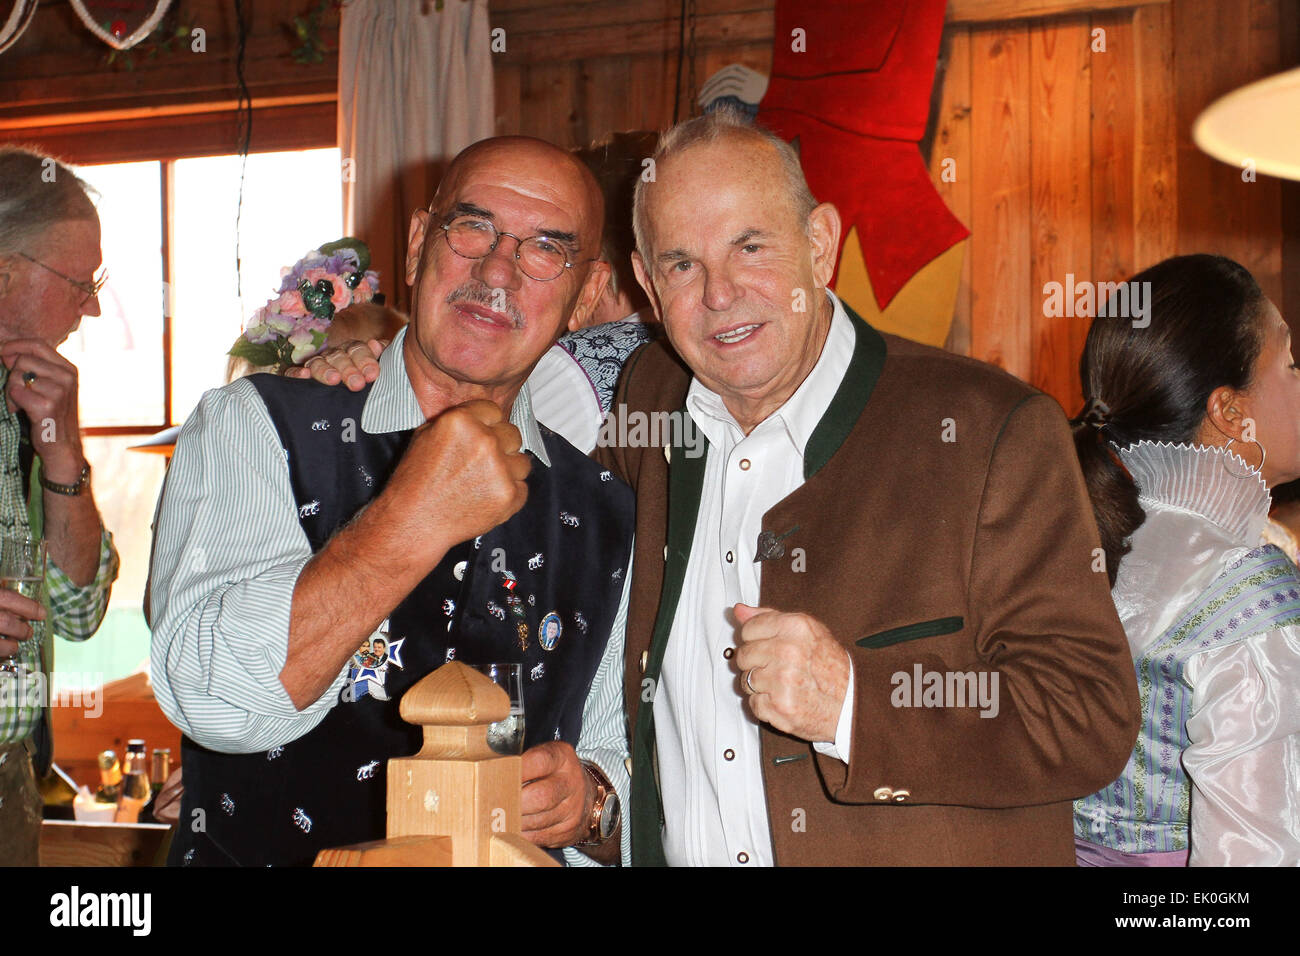 Sauerland boxing promoter's party at Weinzelt tent during the 2014 Oktoberfest (Wiesn) Featuring: Otto Retzer,Wilfried Sauerland Where: Munich, Germany When: 30 Sep 2014 Stock Photo